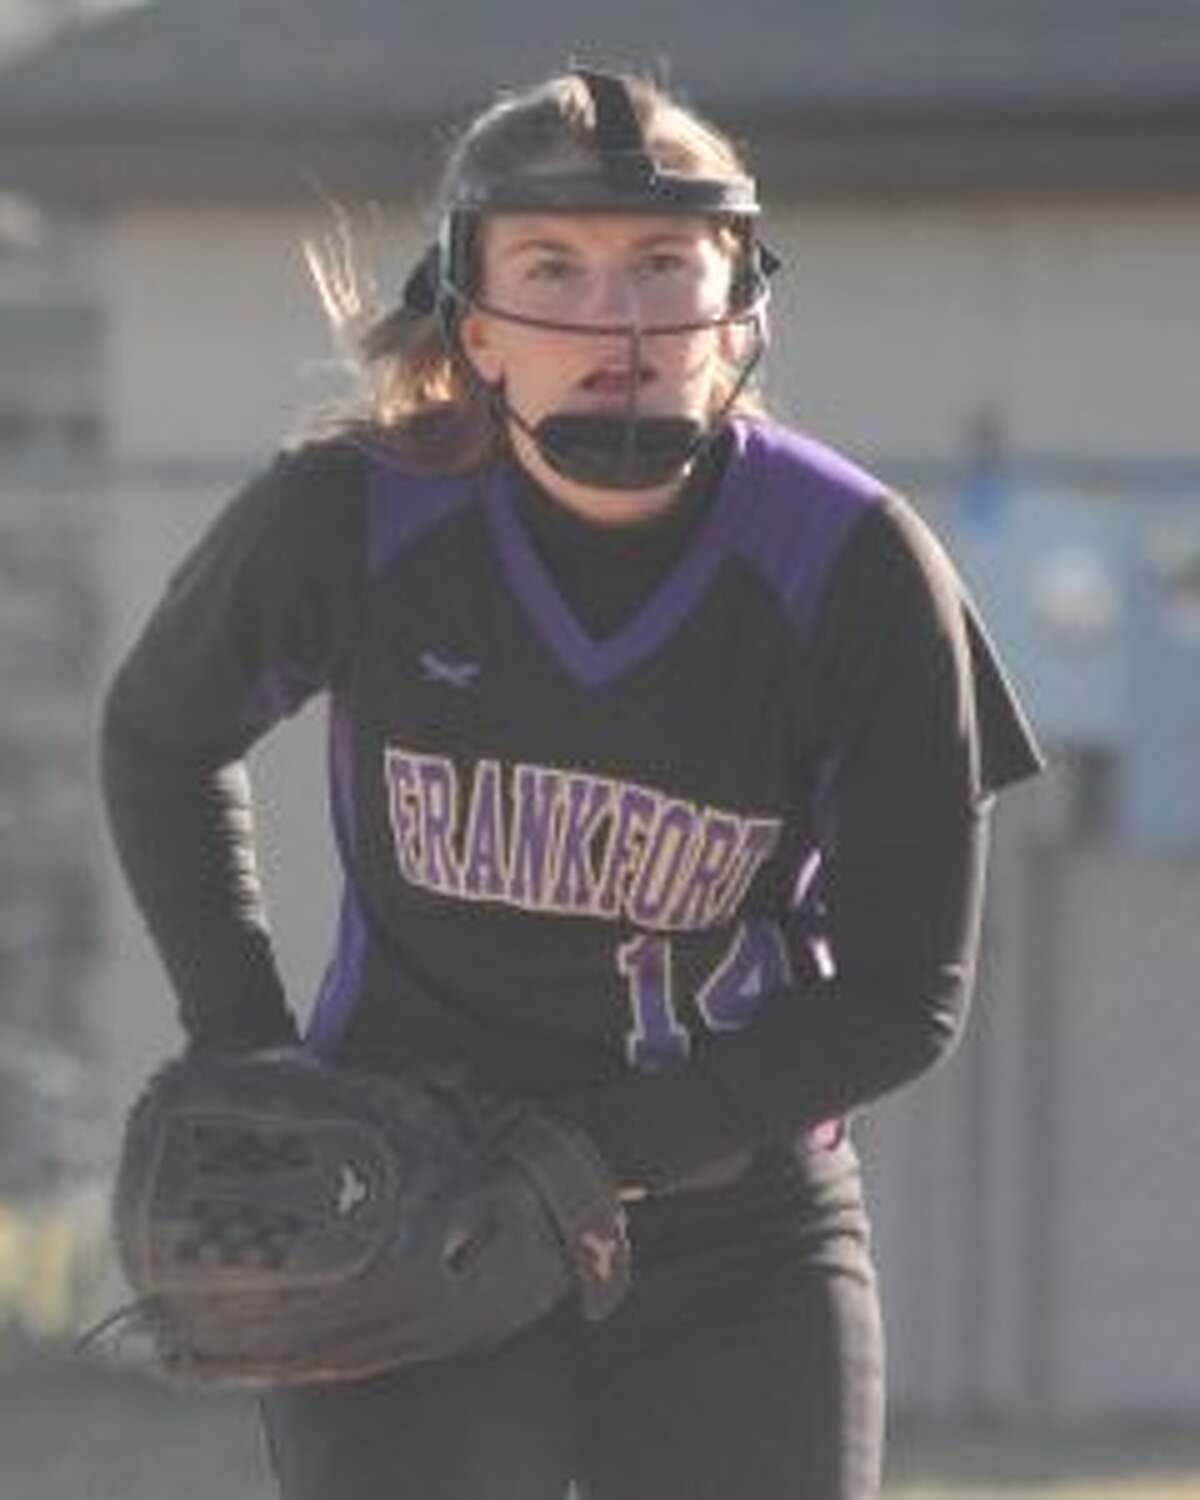 The Frankfort softball team returns all-state senior Natalie Bigley as its top pitcher this spring. (File photo)